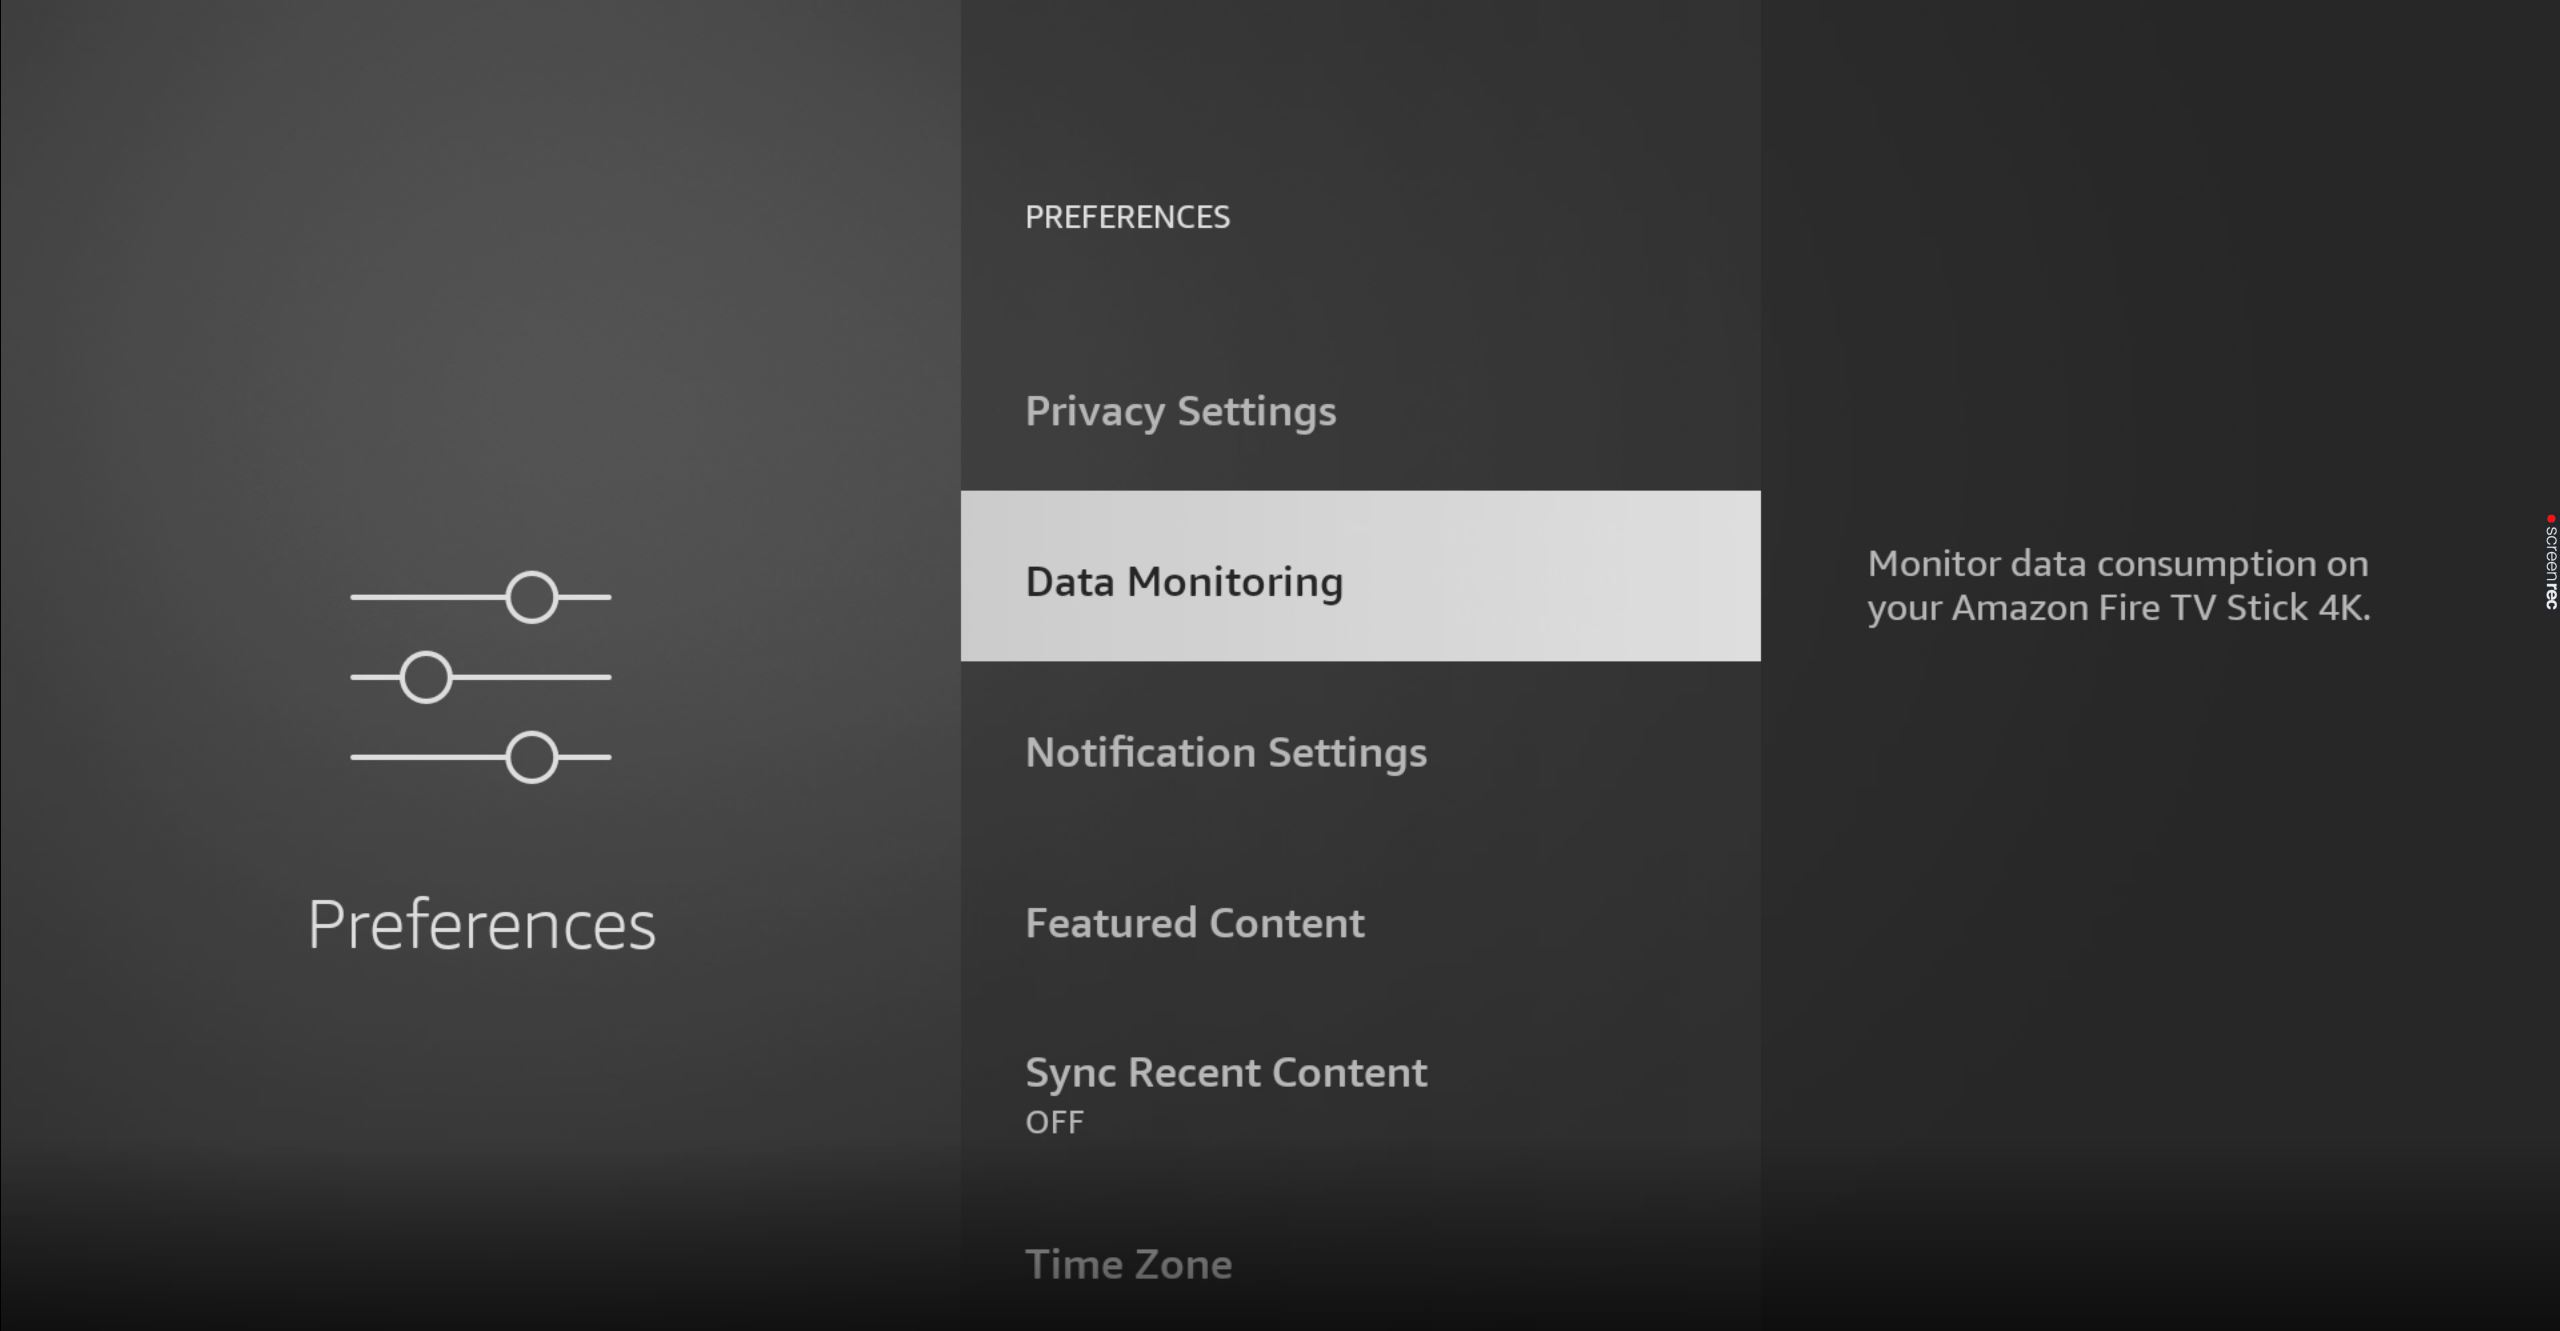 How to access Data Monitoring on Amazon Firestick